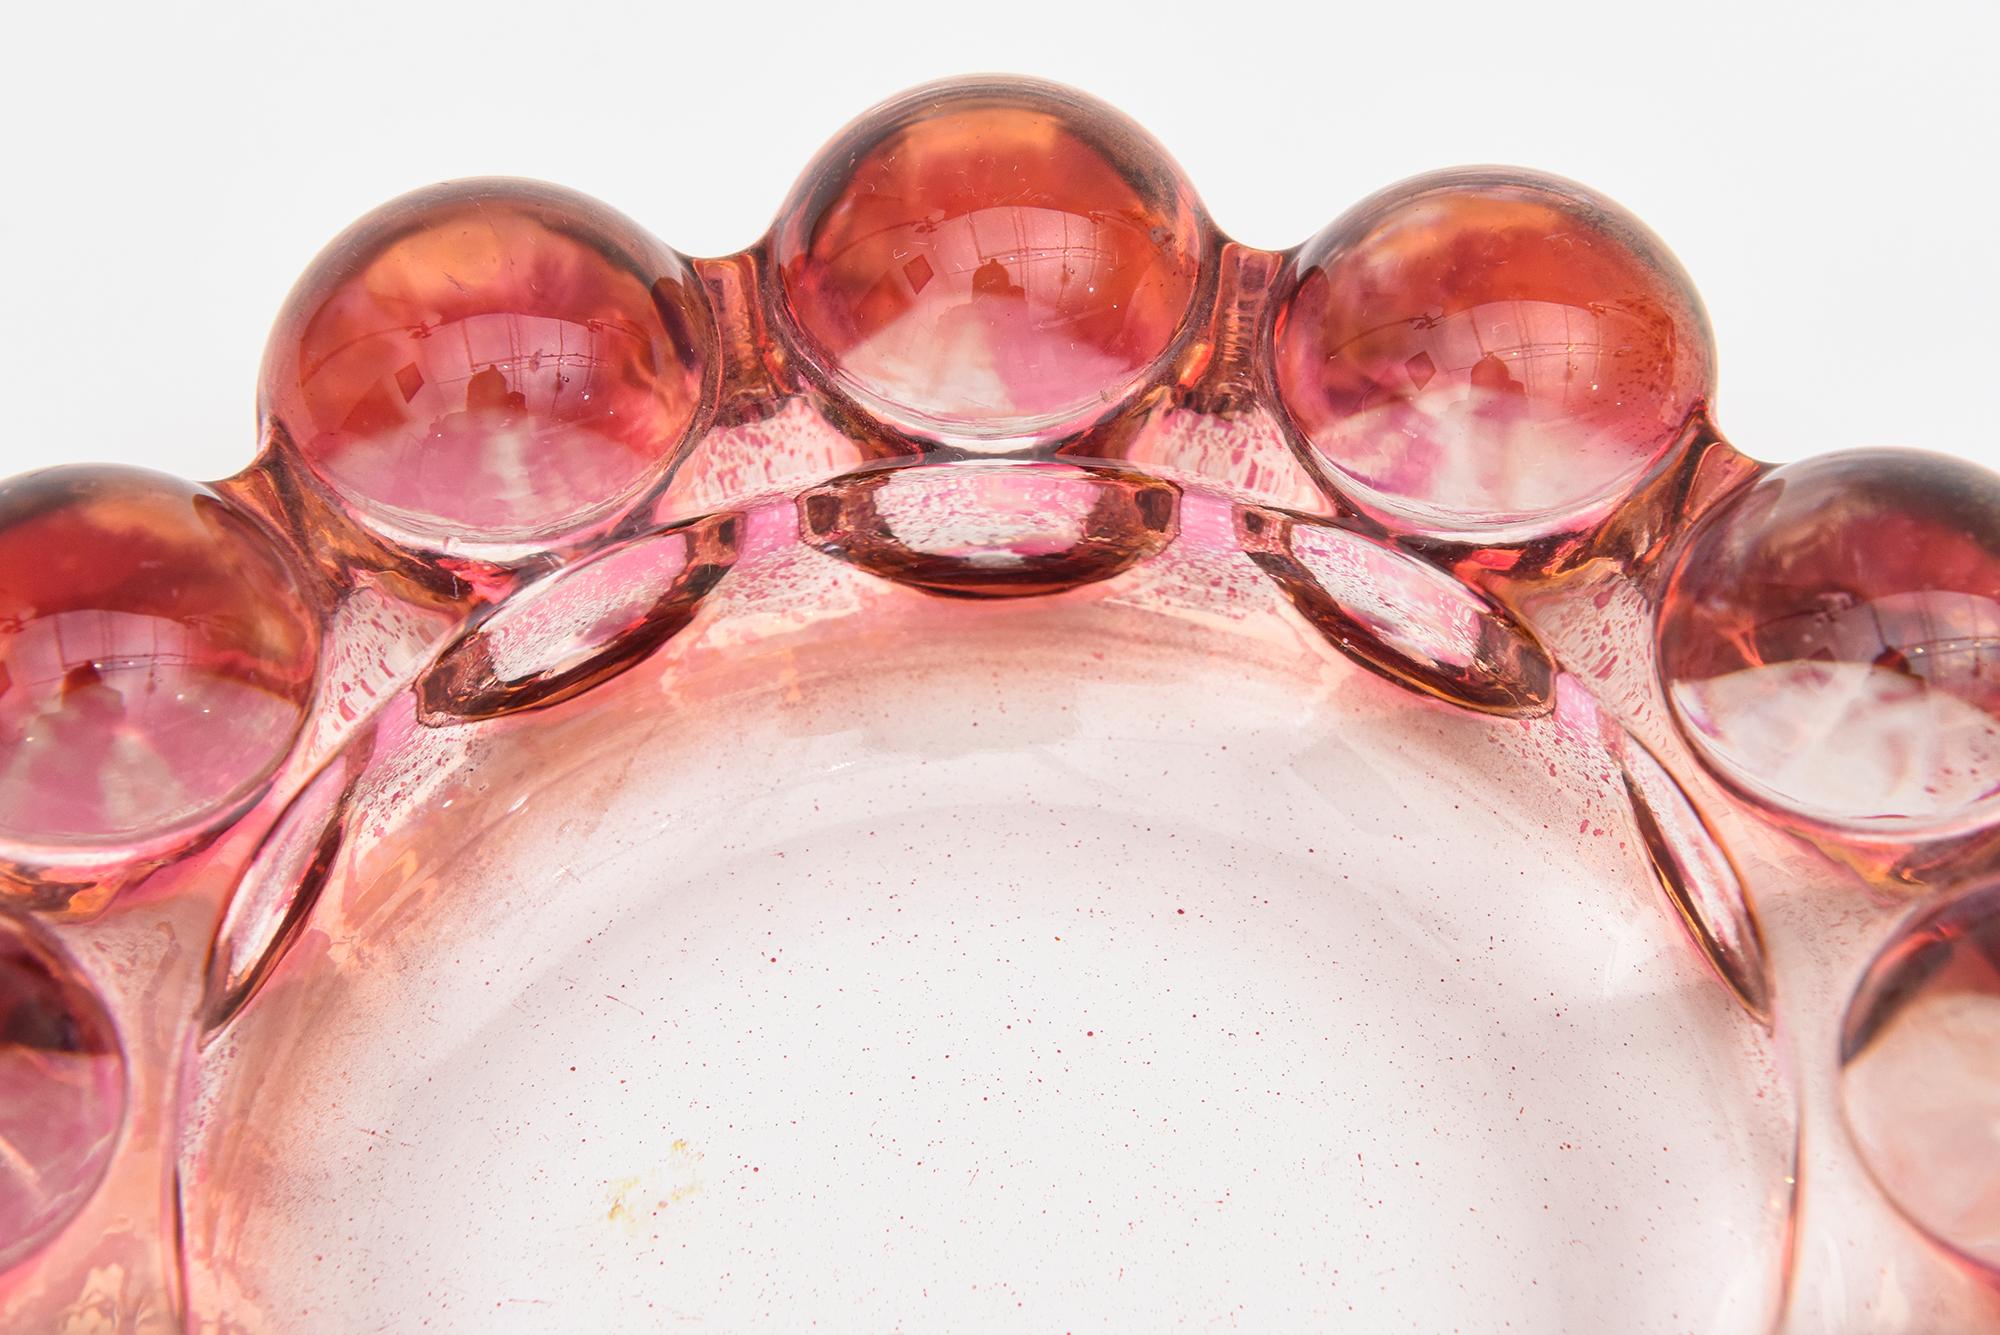 This ever so chic fun ring glass bowl has 12 round round semi dome balls as the exterior. It is American from the 40's. The colors are pink, hot pink and cranberry with clear glass. The colors change with the play of light. It is molded glass. Great